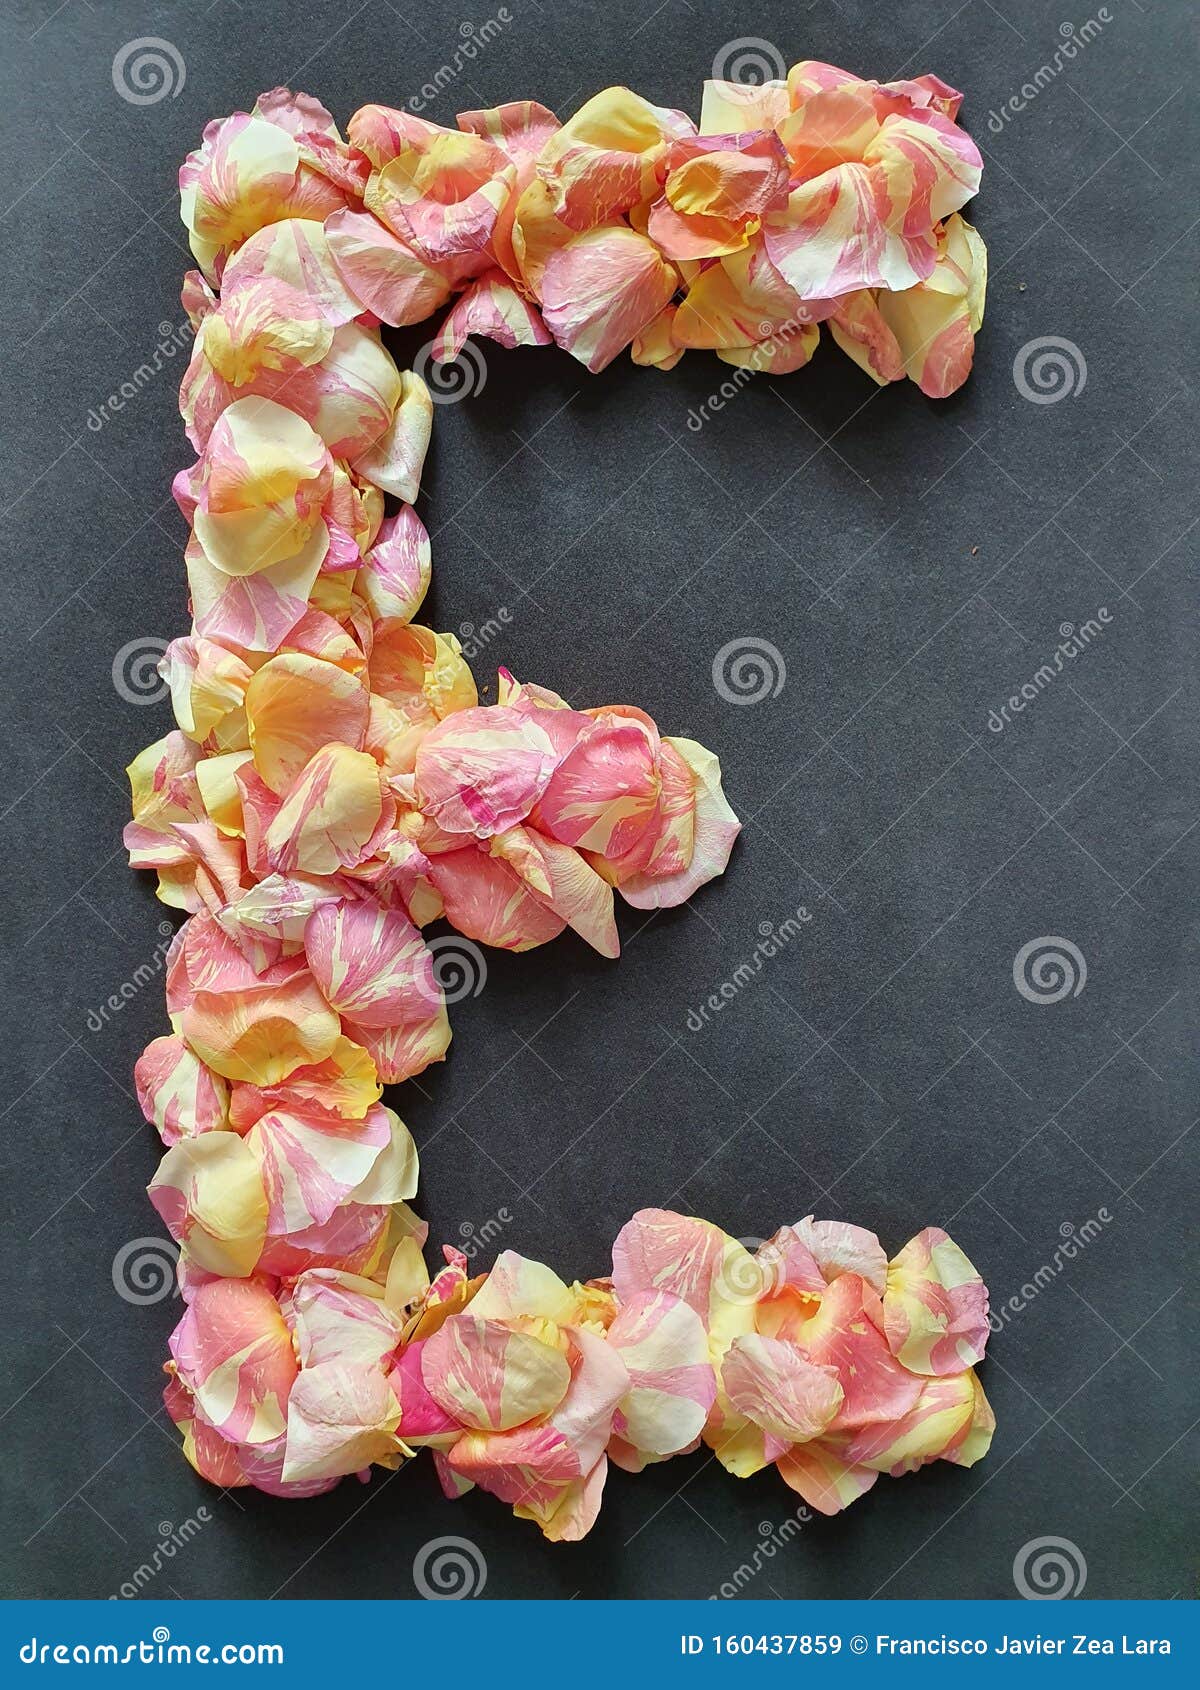 Flowers In The Shape Of An E